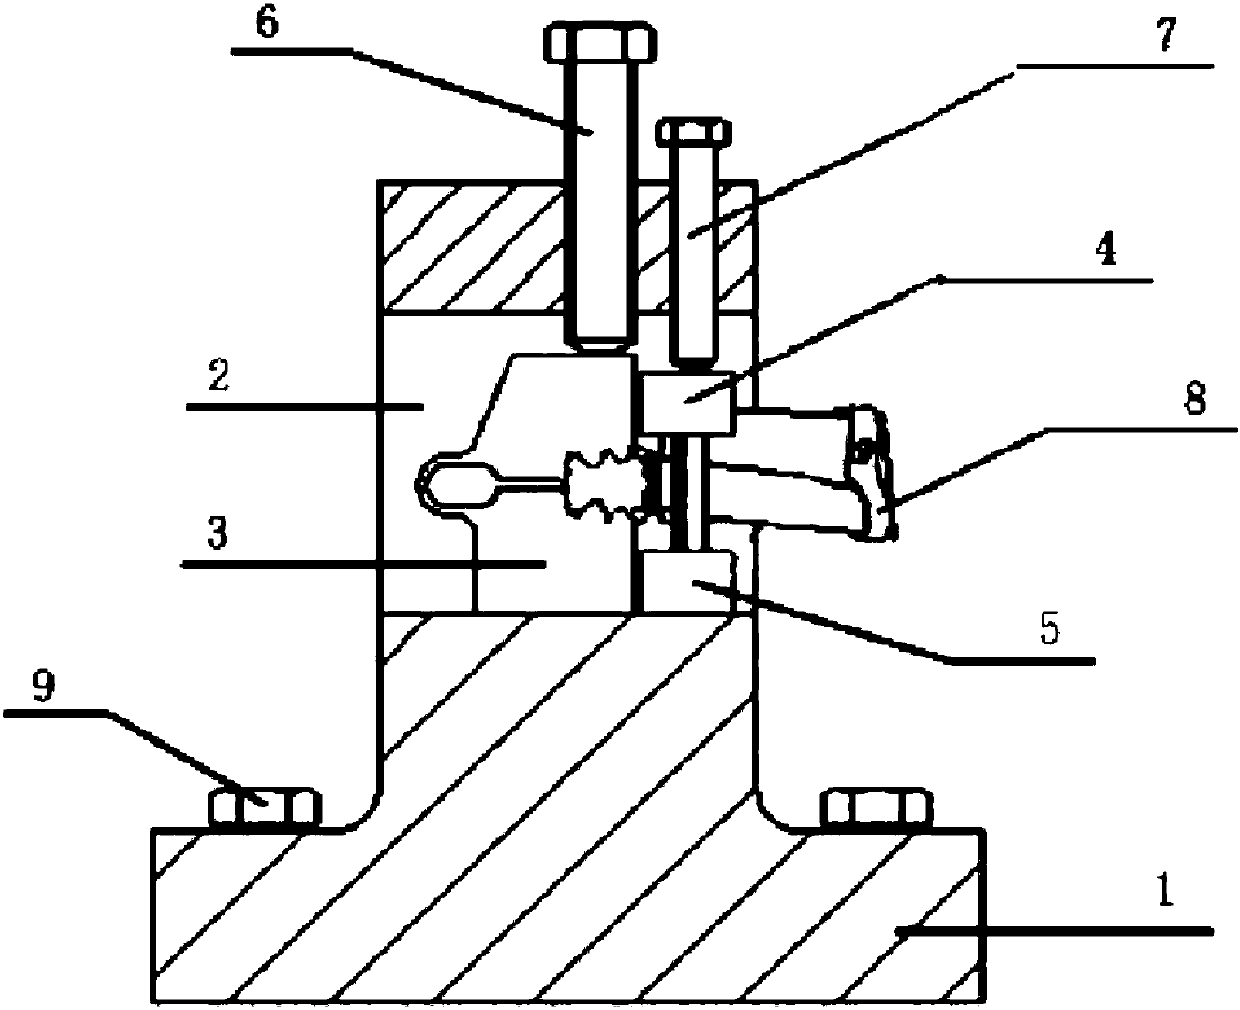 Clamping device for checking fatigue property of high-pressure turbine blade of aero-engine